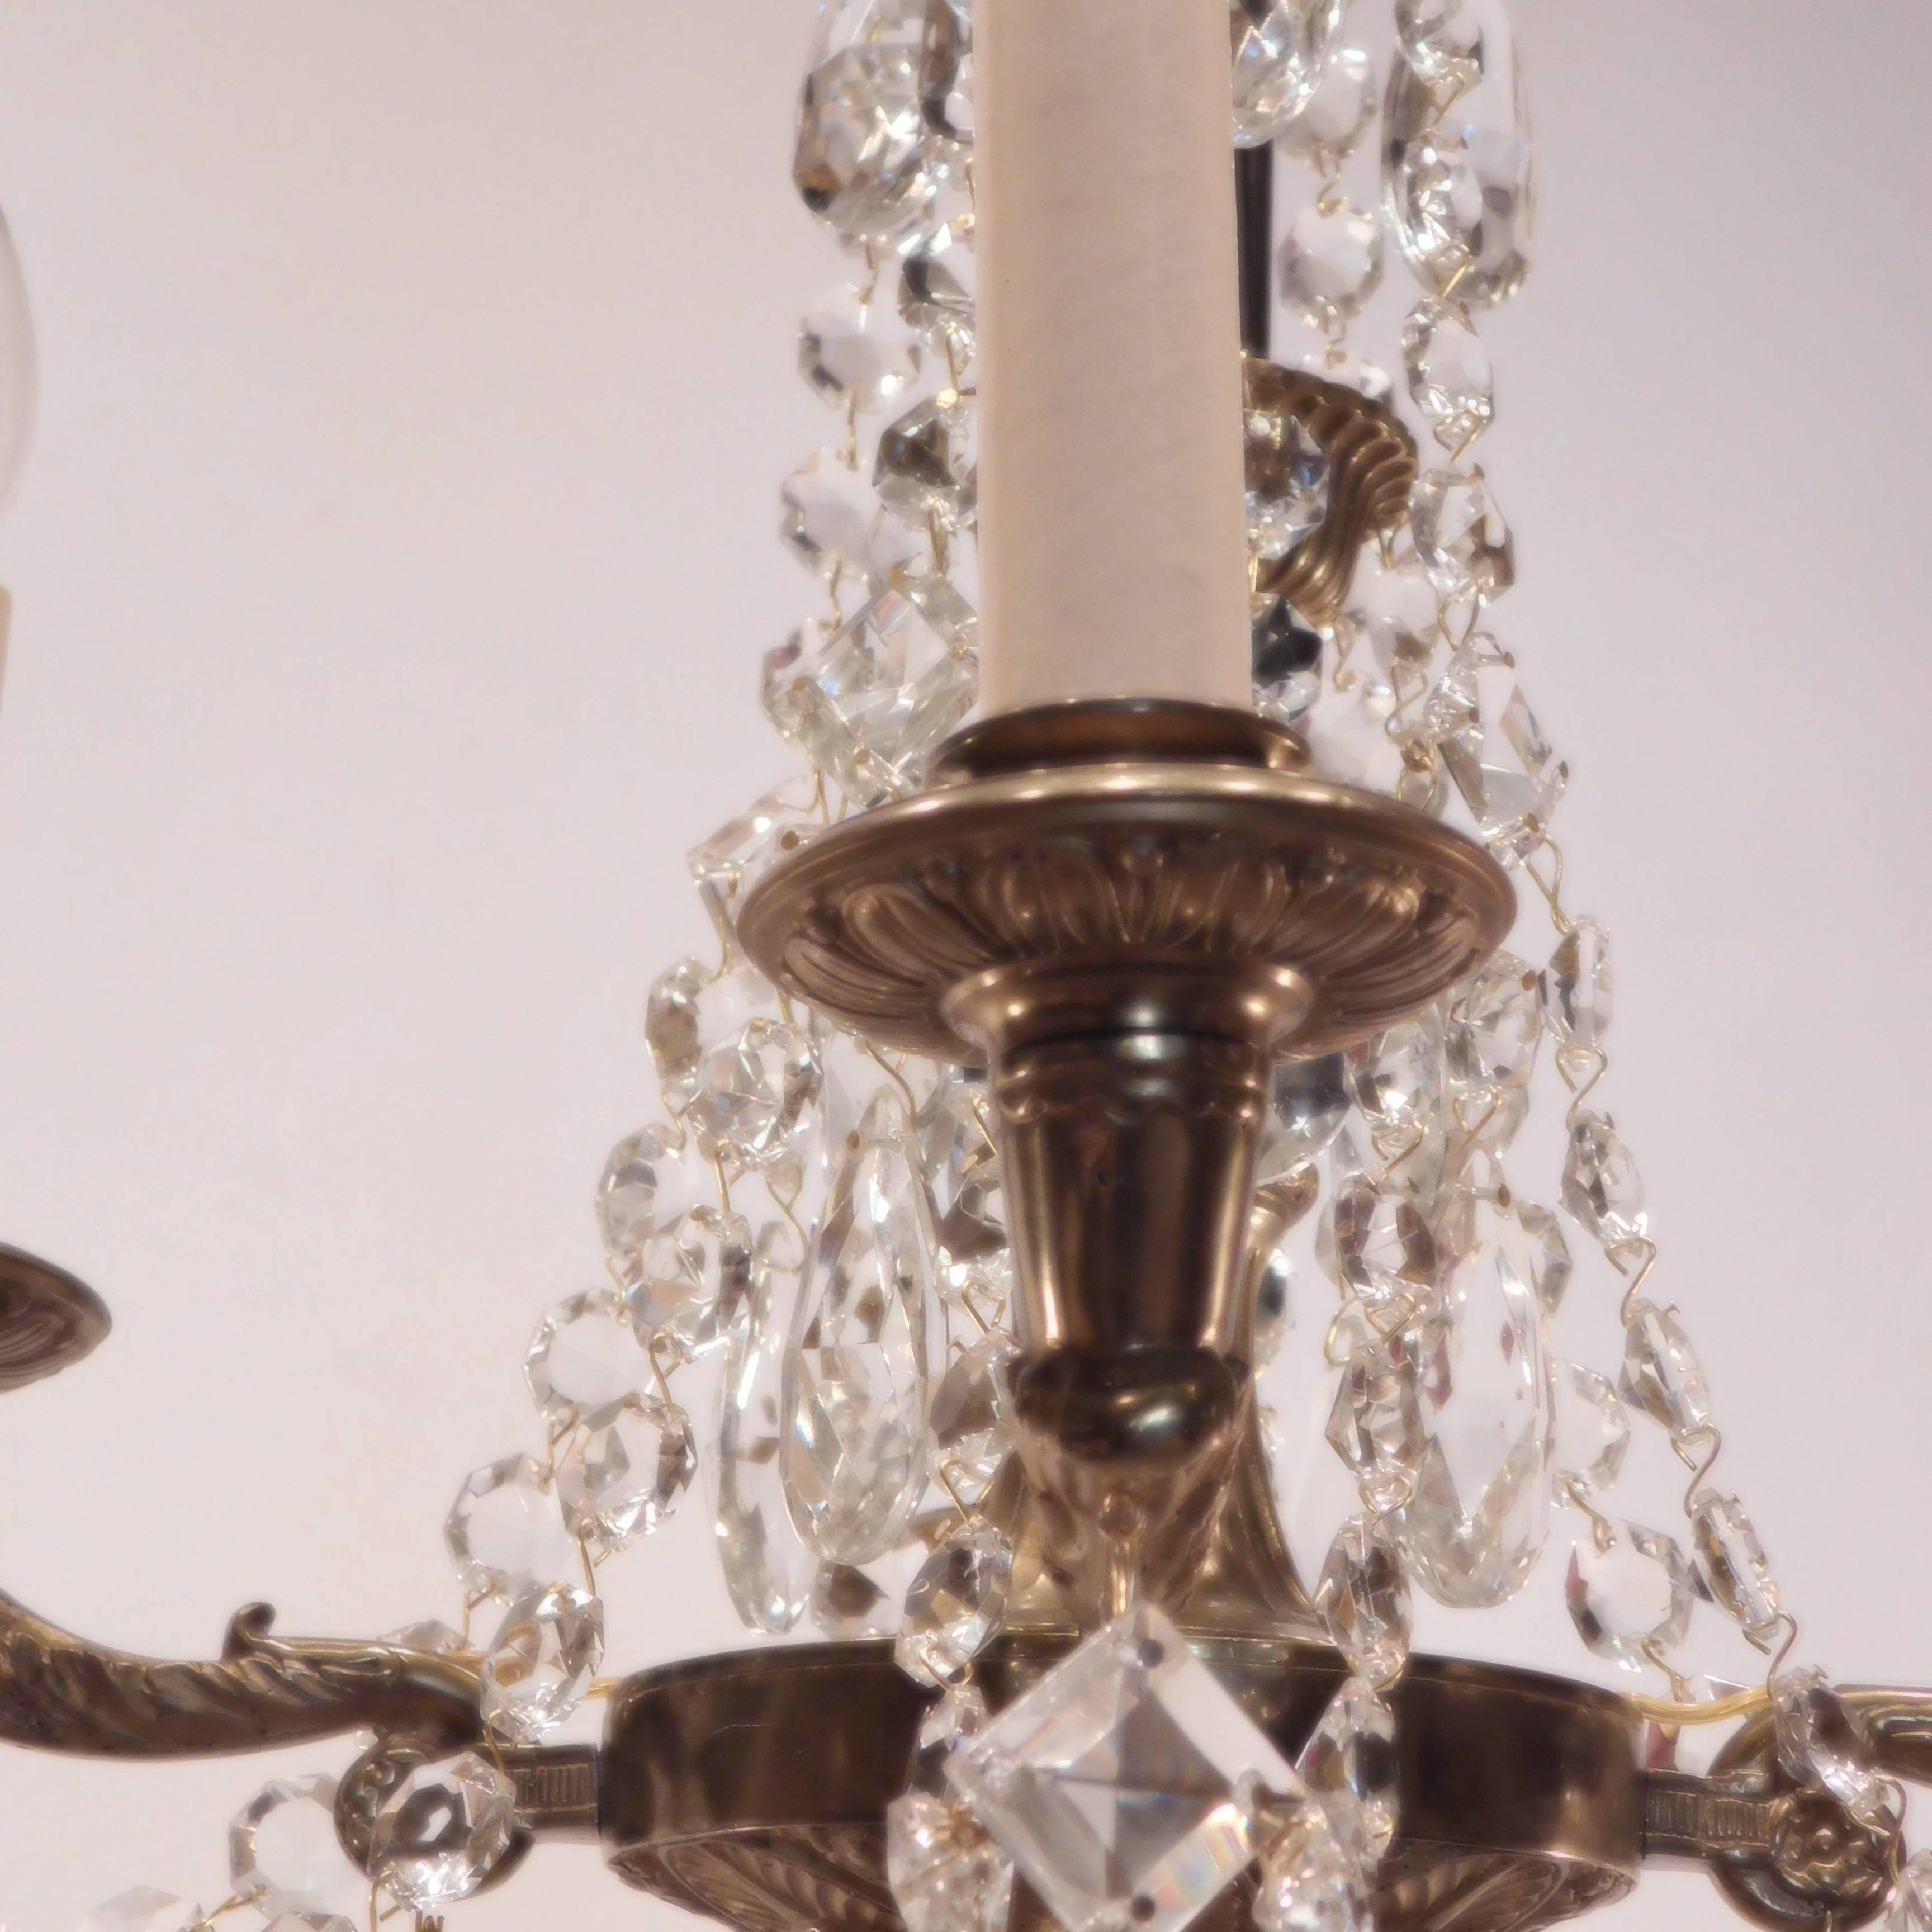 20th Century Neoclassical Four-Light Petite Chandelier, Sweden